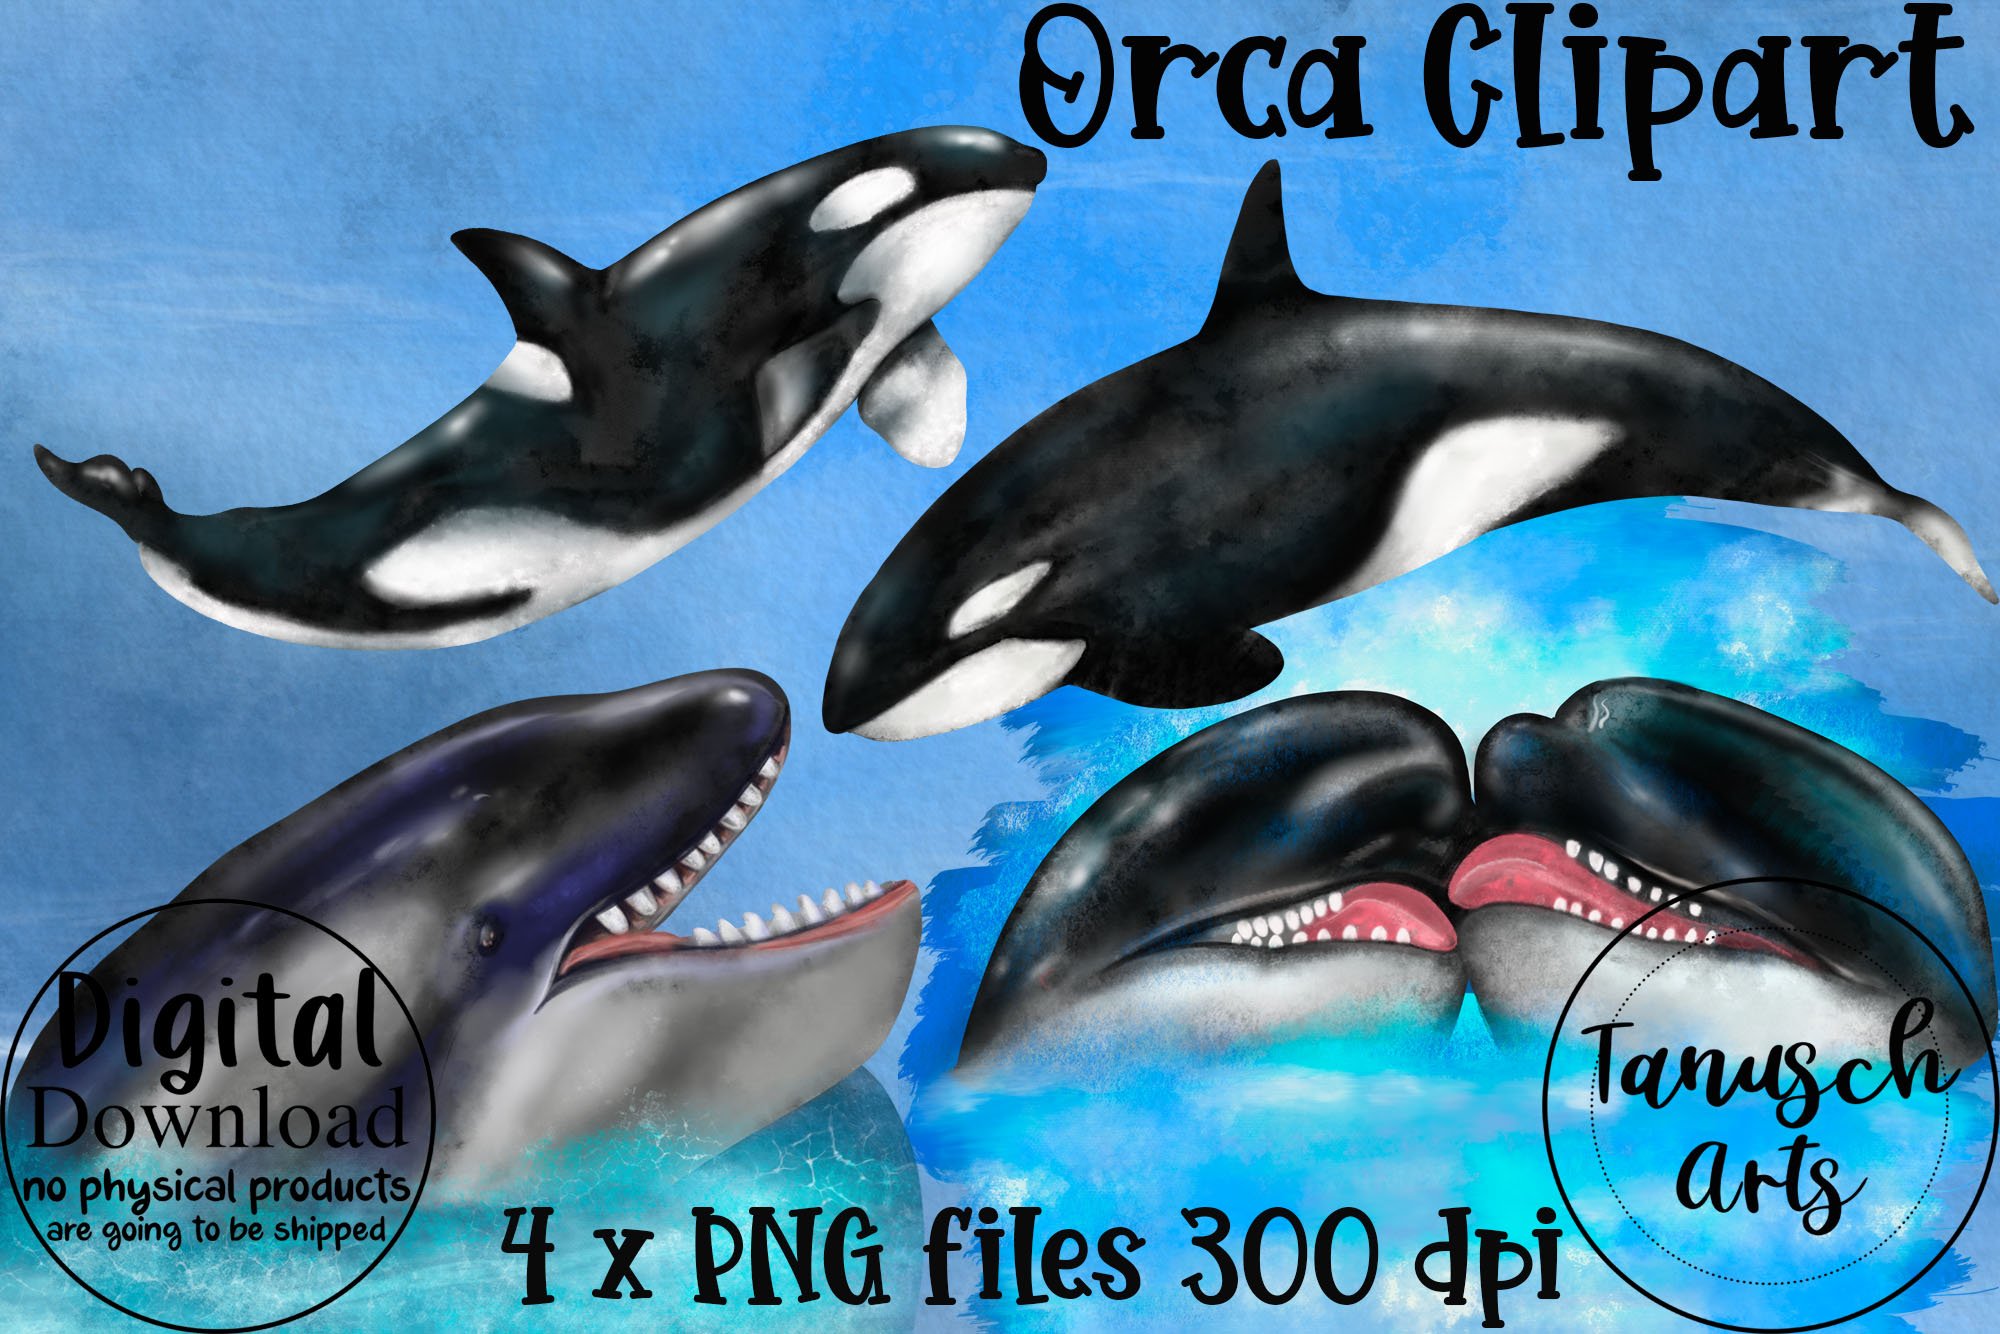 ORCA Clipart Lovely Killer Whale preview image.